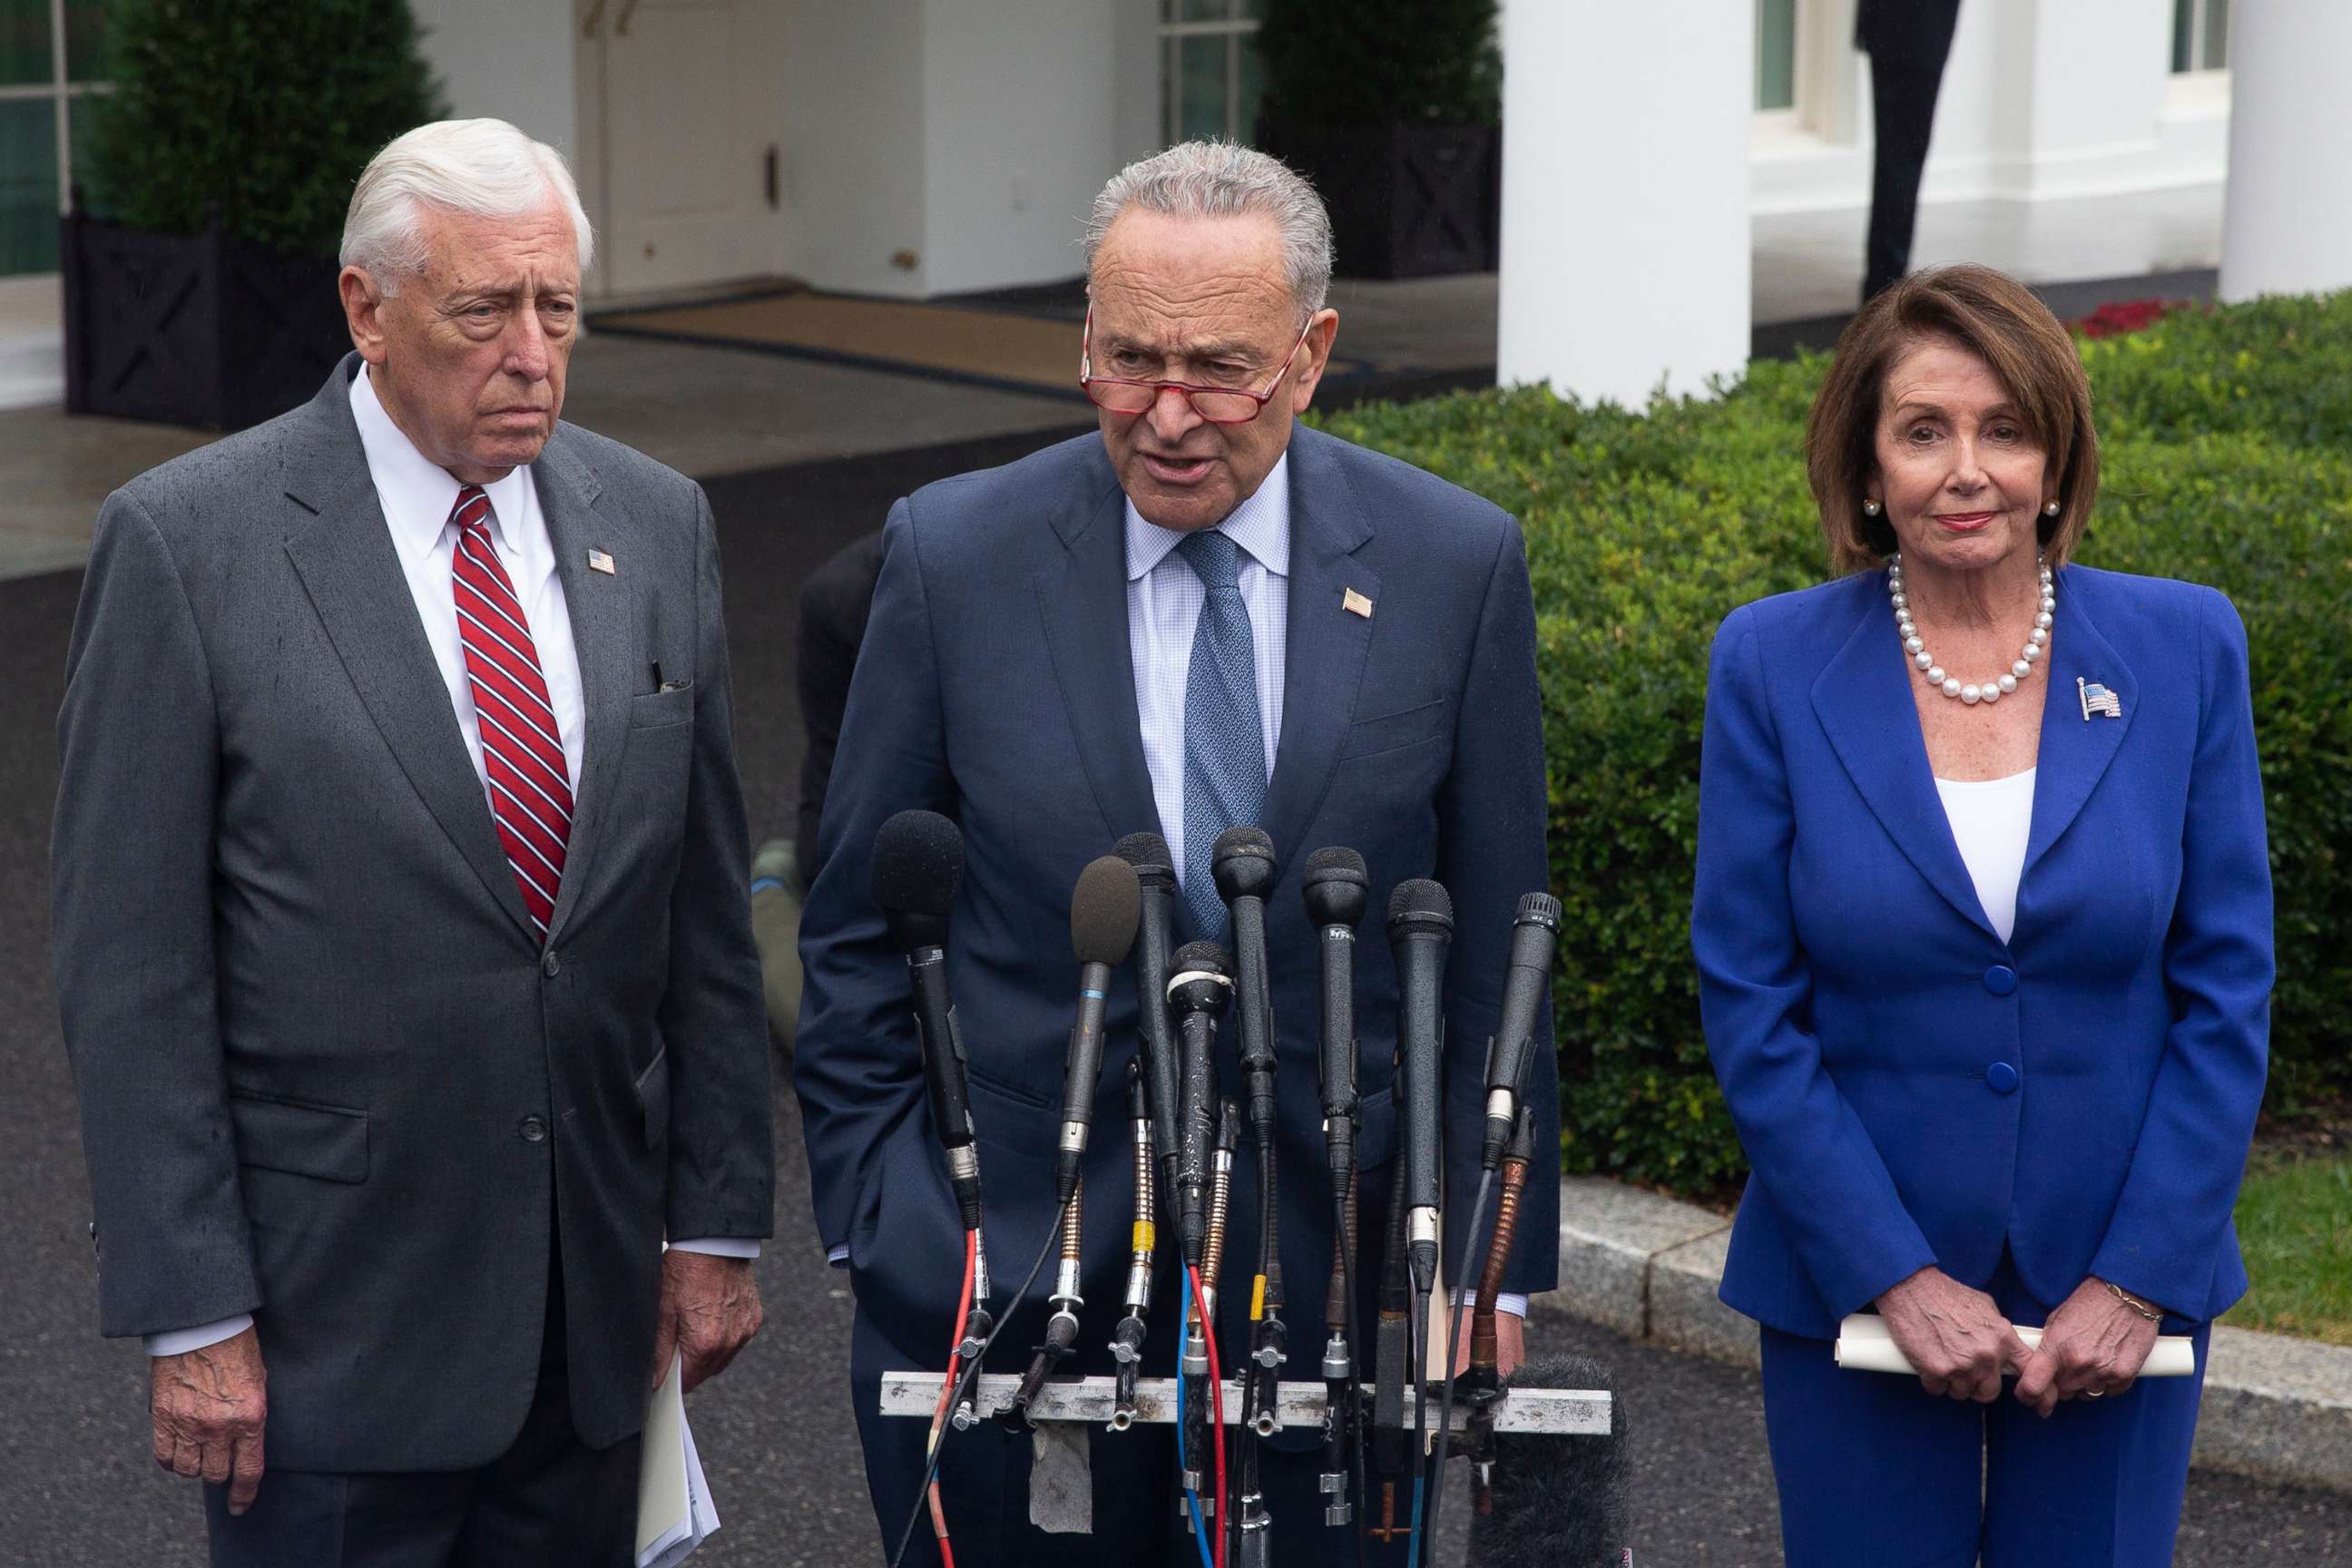 PHOTO: Speaker of the House Nancy Pelosi (R), Senate Minority Leader Chuck Schumer (C), and House Majority Leader Steny Hoyer (L) deliver remarks to members of the news media outside the West Wing of the White House, Oct. 16, 2019.